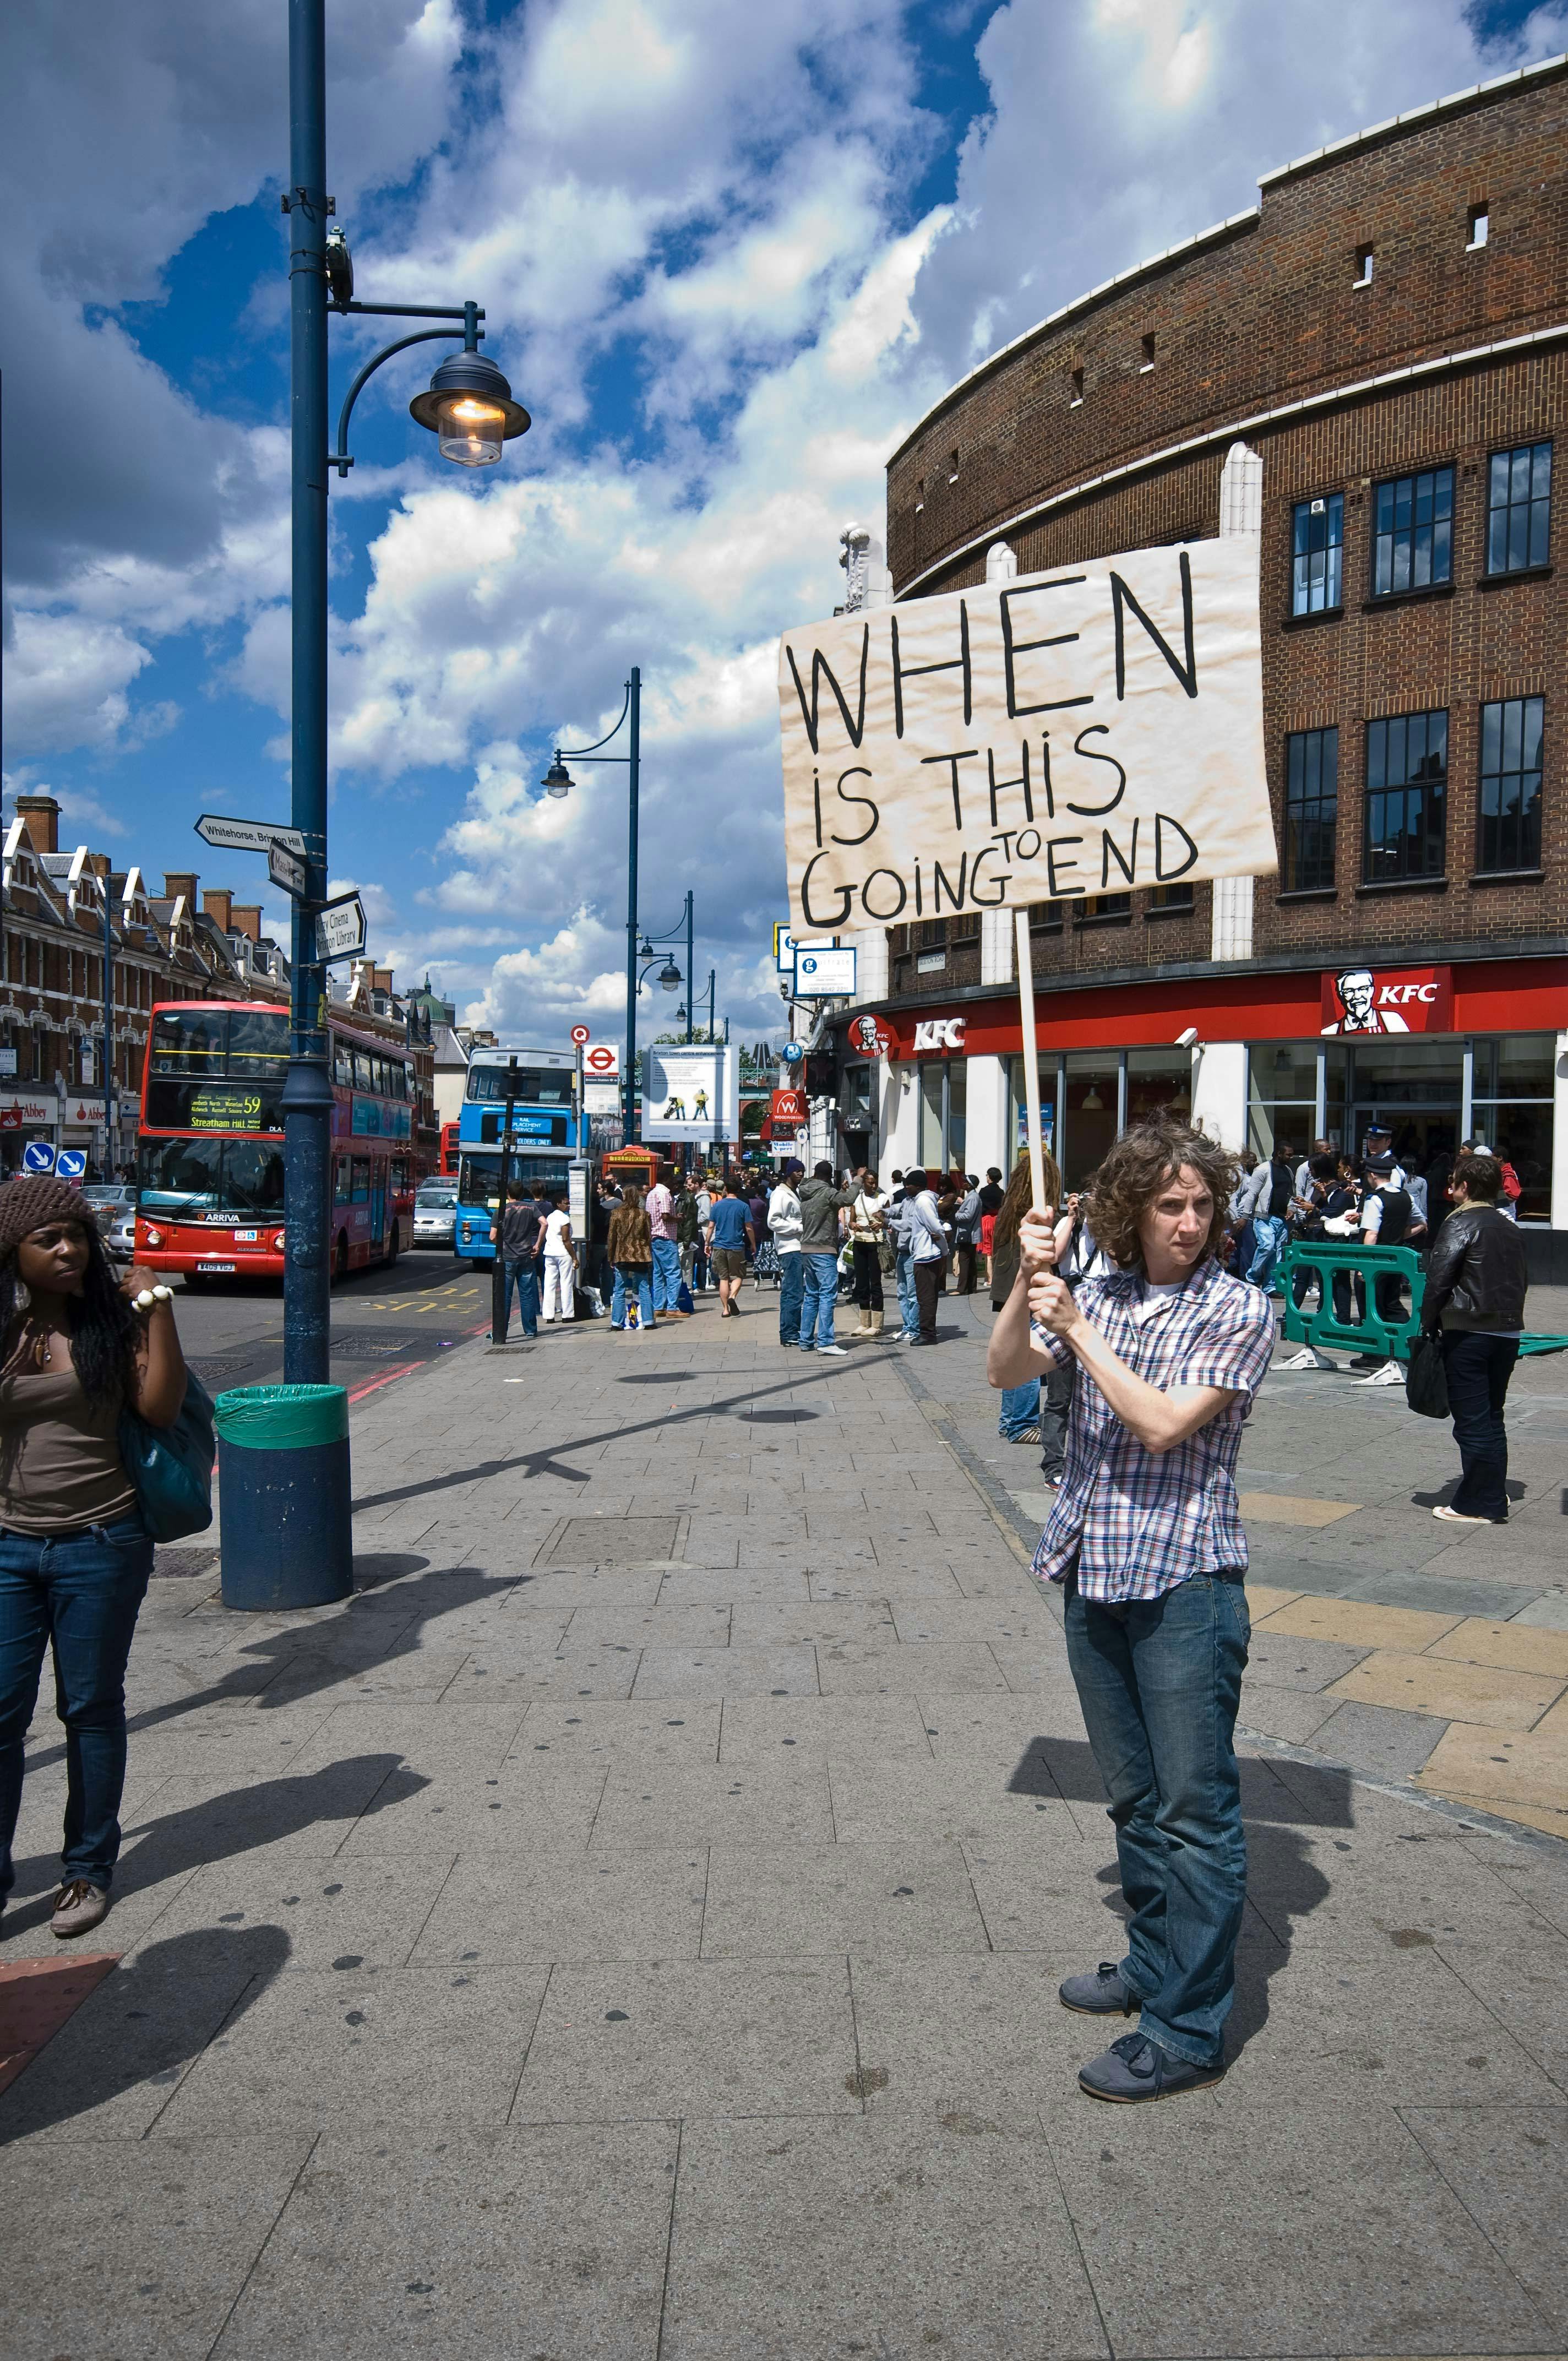 A photograph depicting a protester on a city street holding a sign that reads "WHEN IS THIS GOING TO END."  